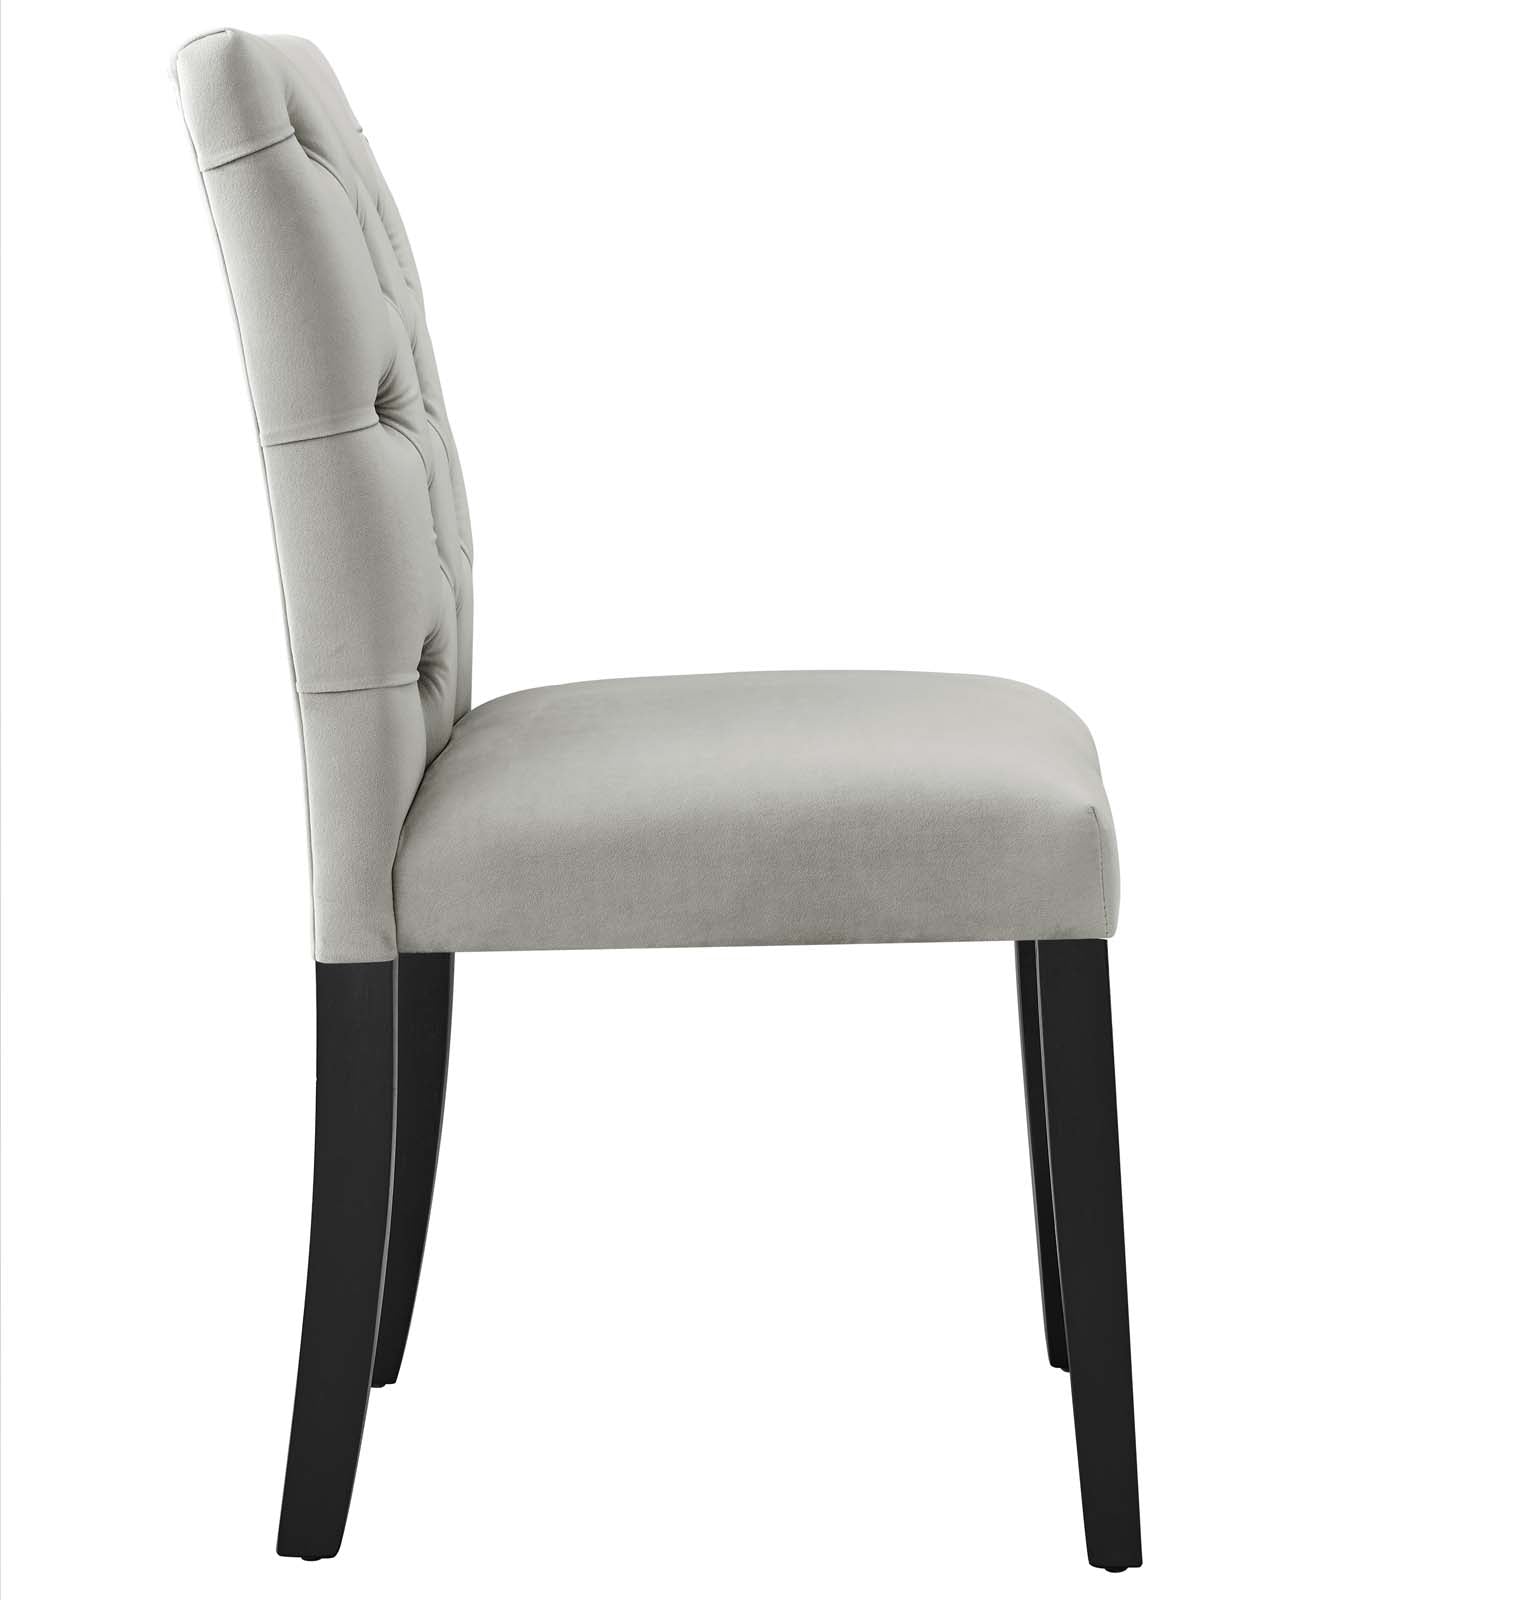 Modway Dining Chairs - Duchess Performance Velvet Dining Chairs - Set of 2 Light Gray